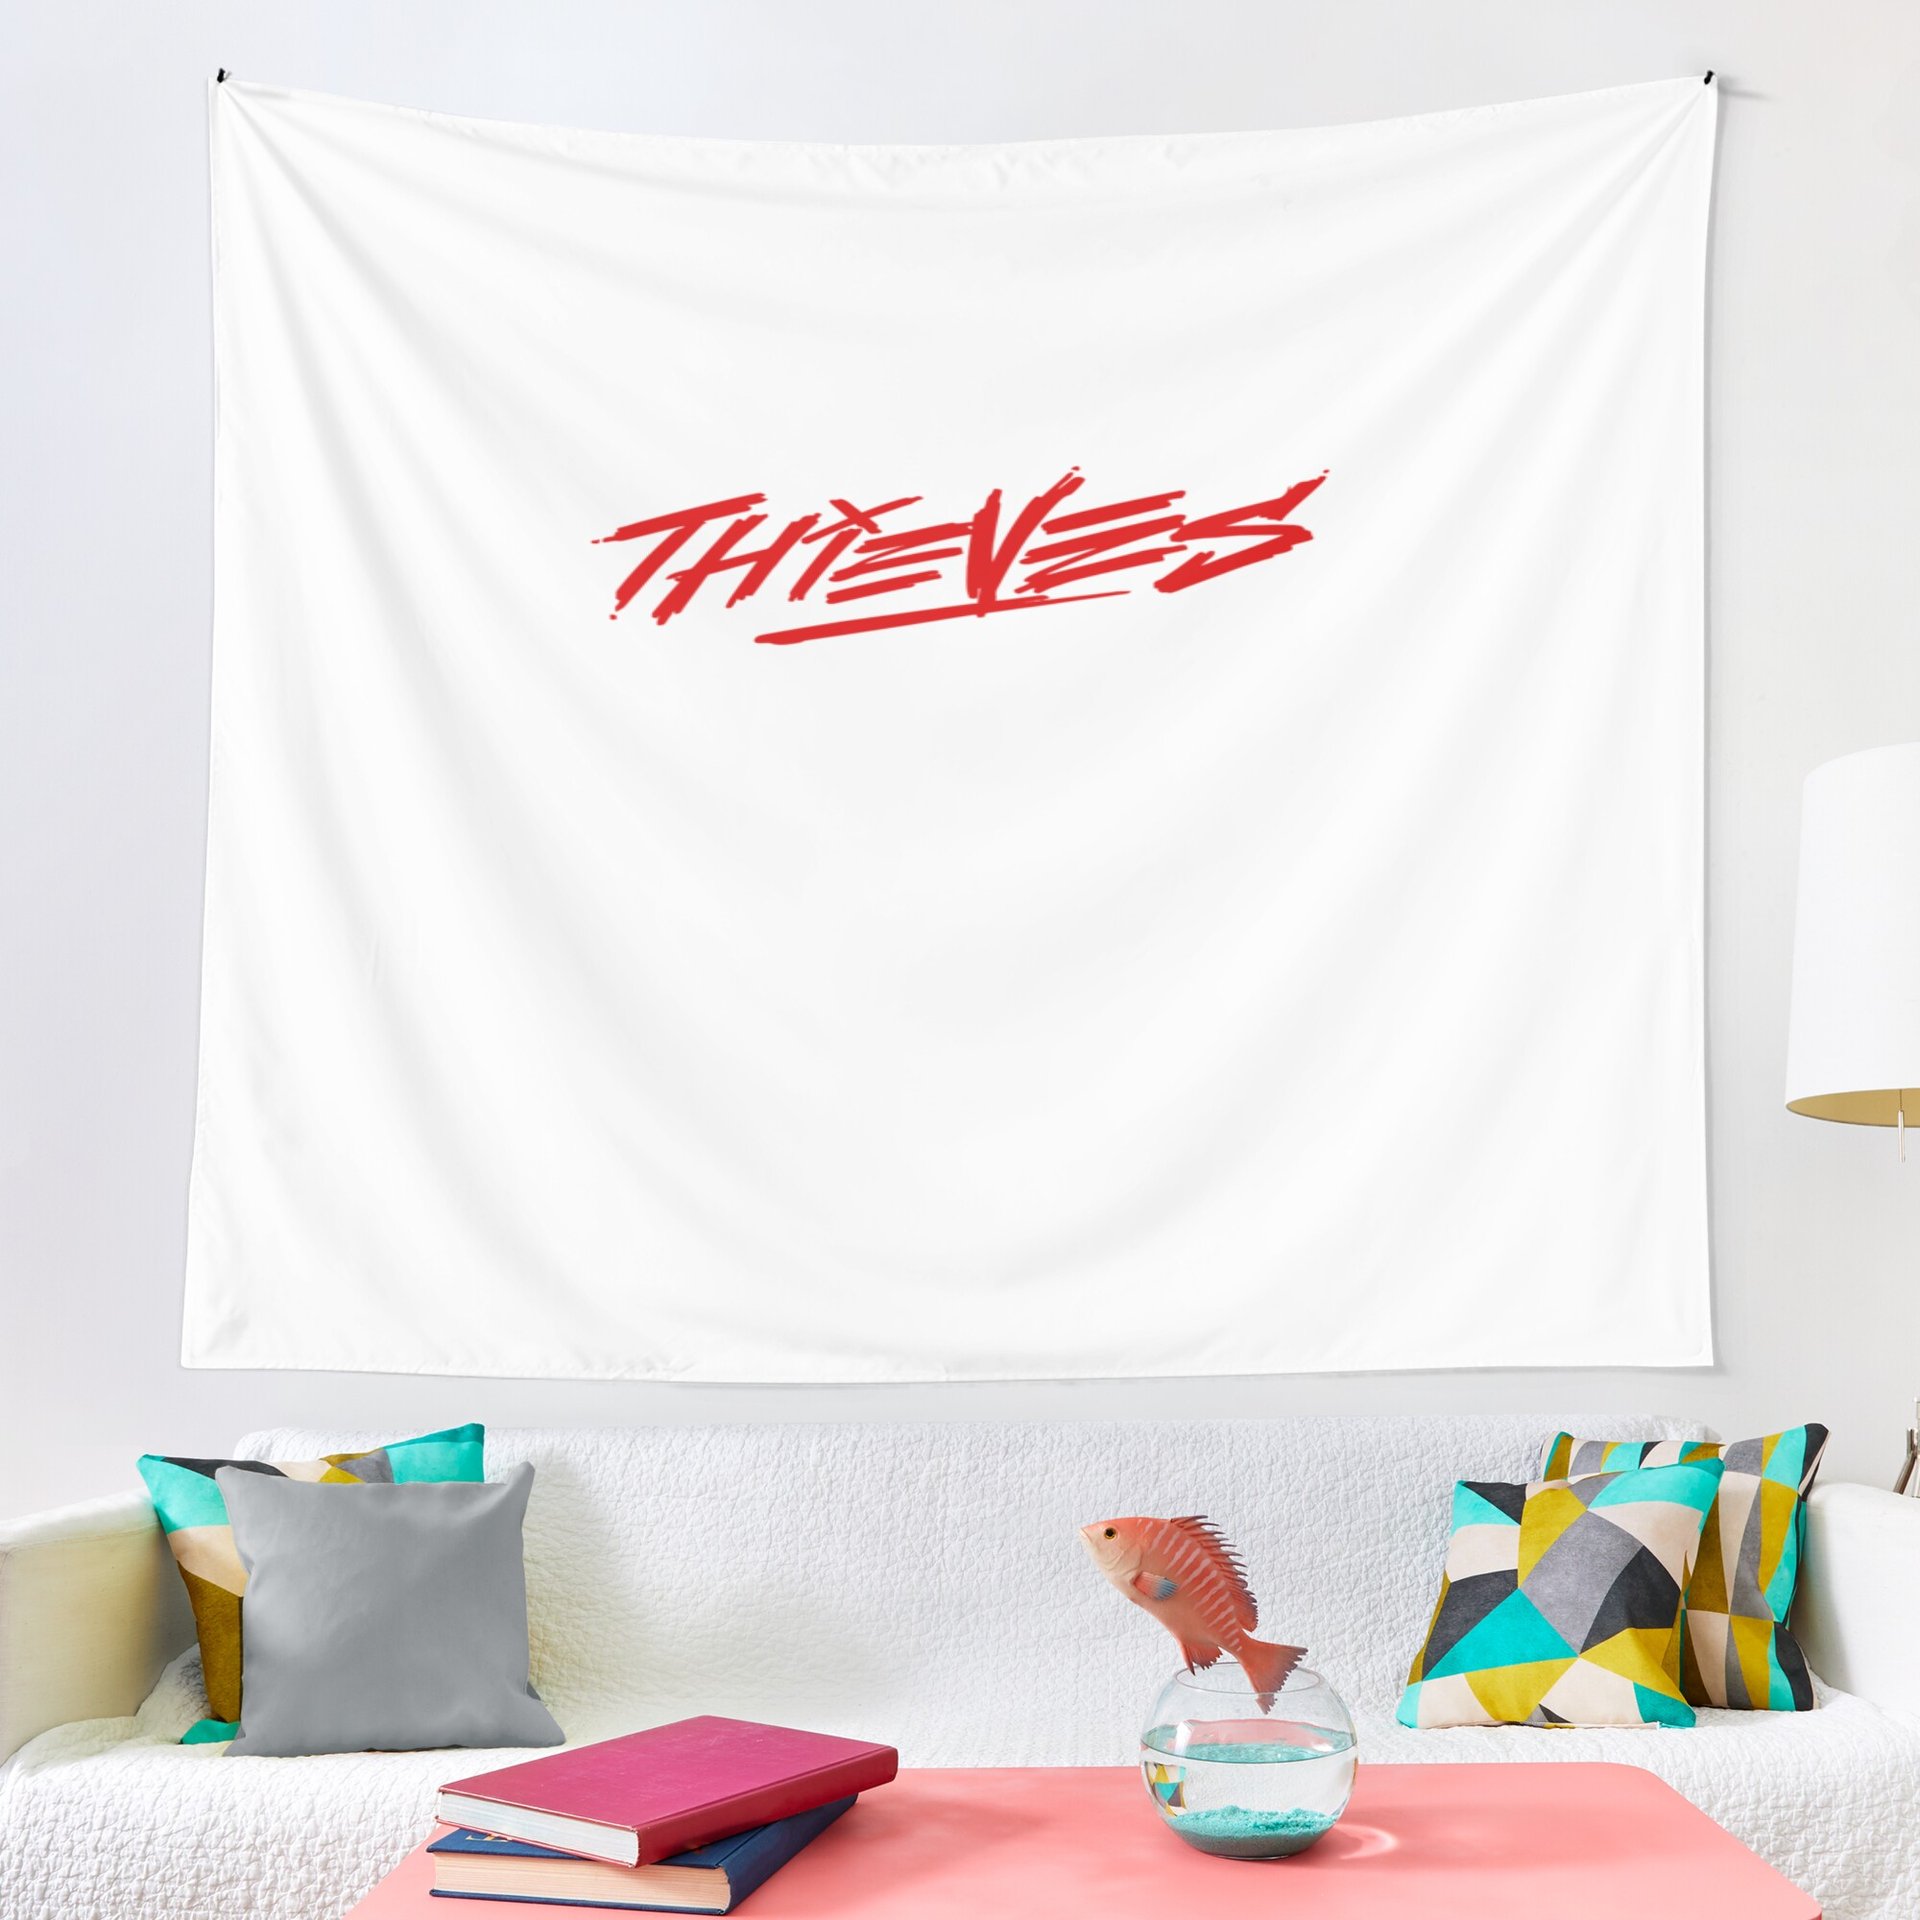 urtapestry lifestyle largesquare2000x2000 5 - 100 Thieves Shop